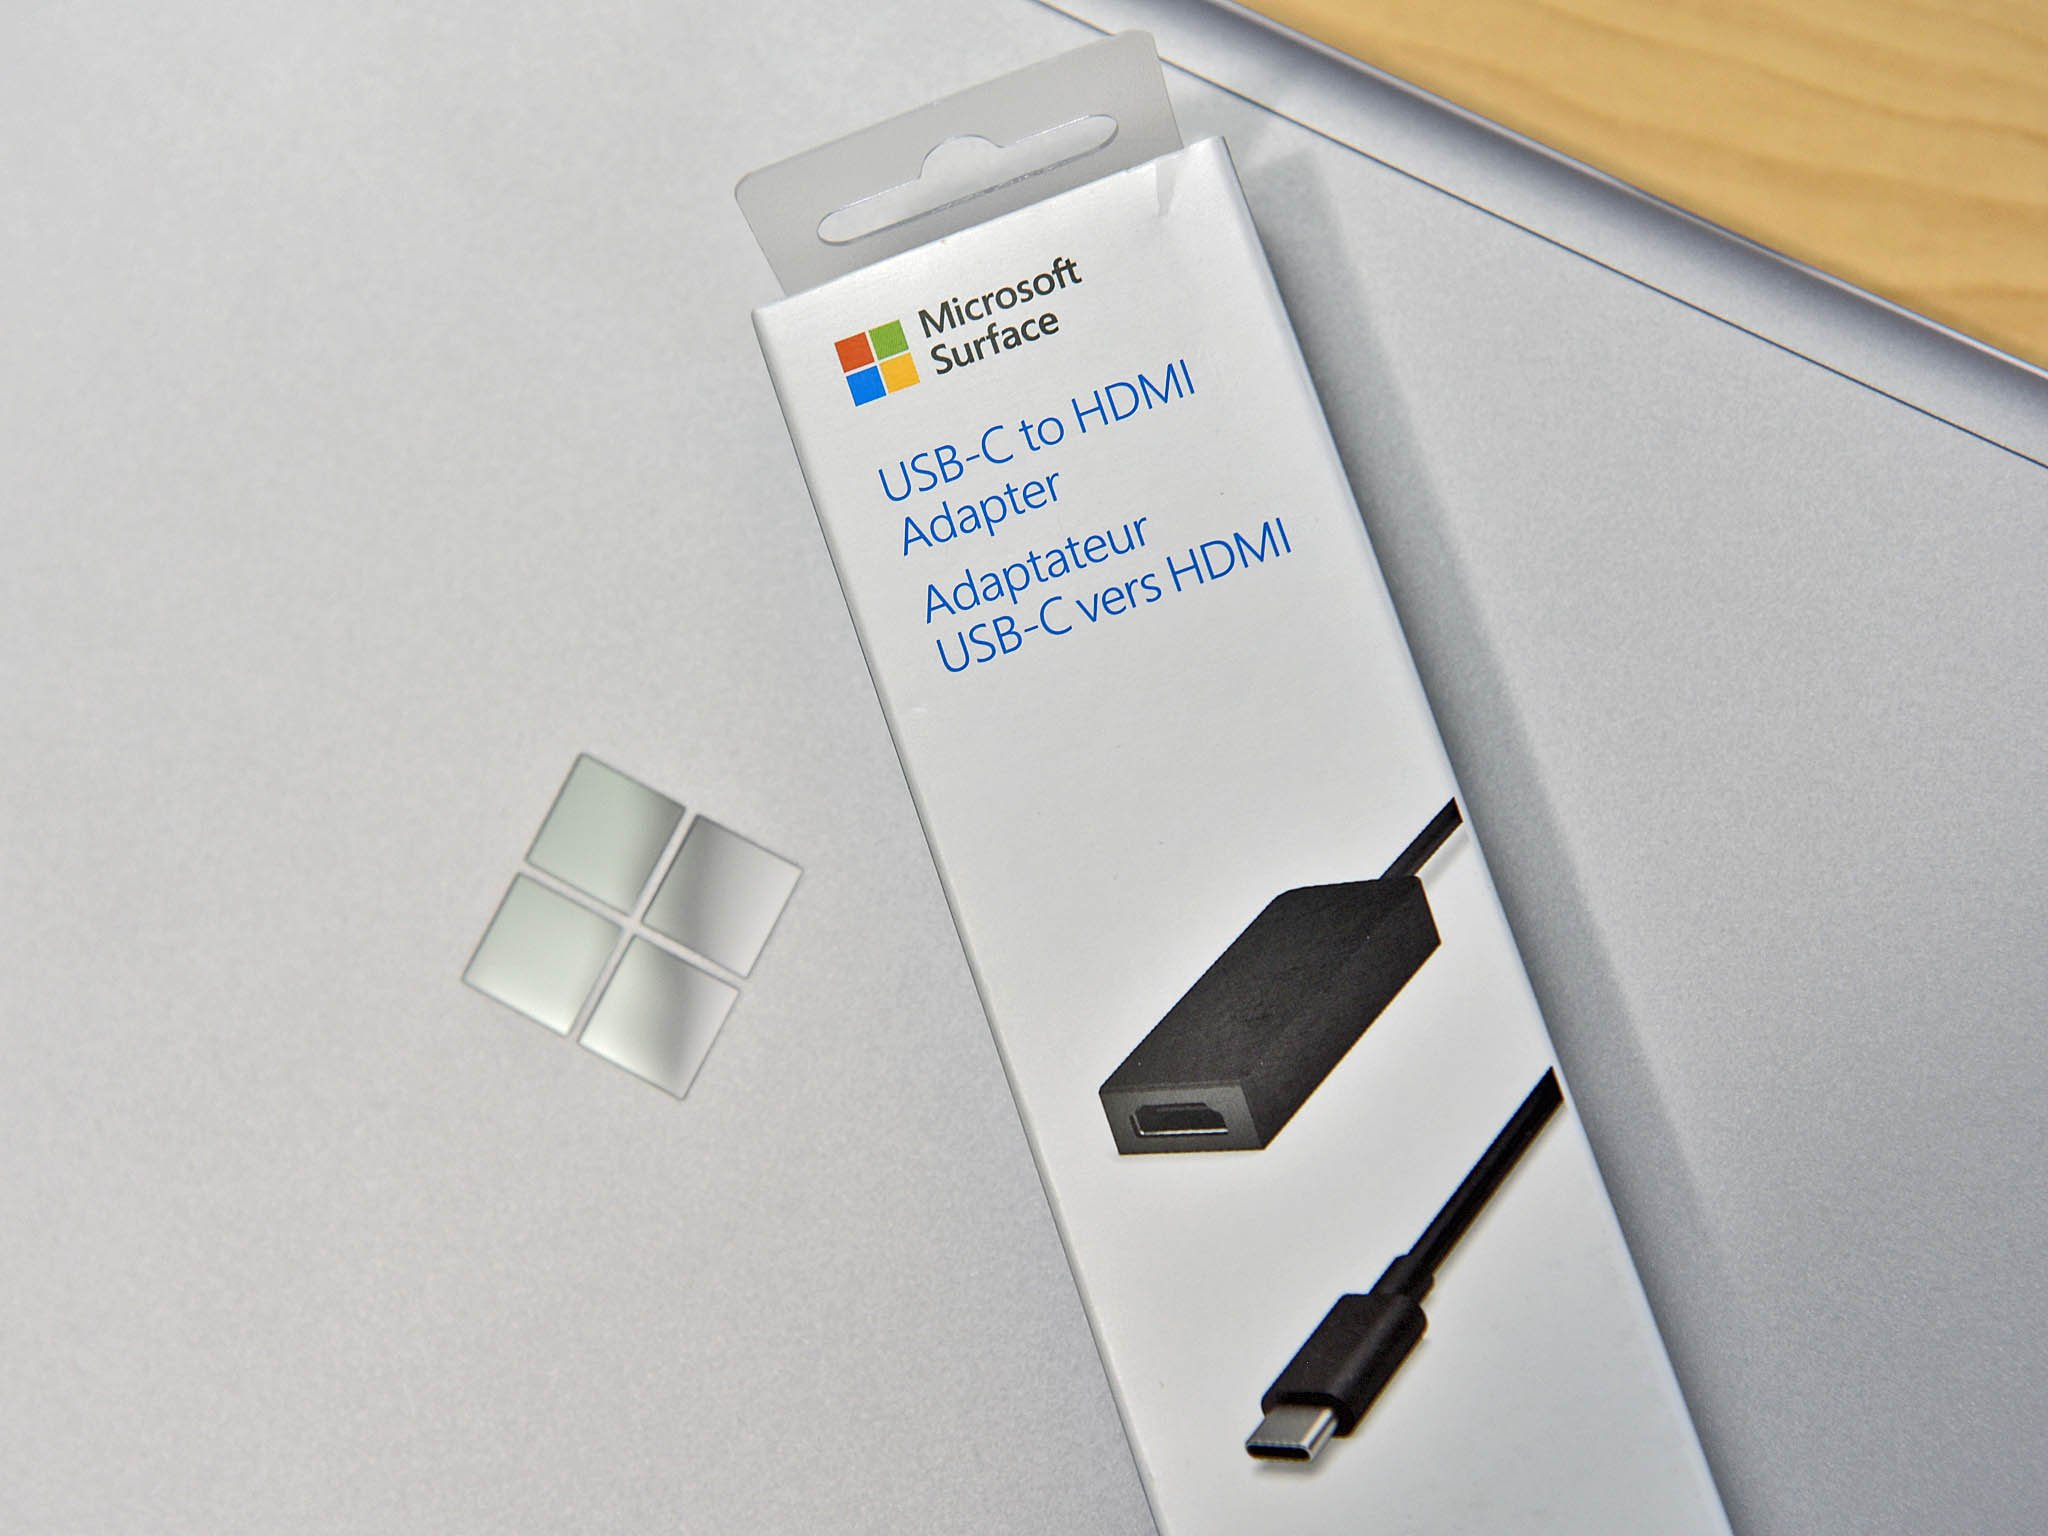 Daniel on Twitter: "Quick review of the Microsoft USB-C to adapter. Works with Windows Mixed Reality and Surface Book 2 https://t.co/tdmW1mBlaK https://t.co/l0af3GsF6f" Twitter